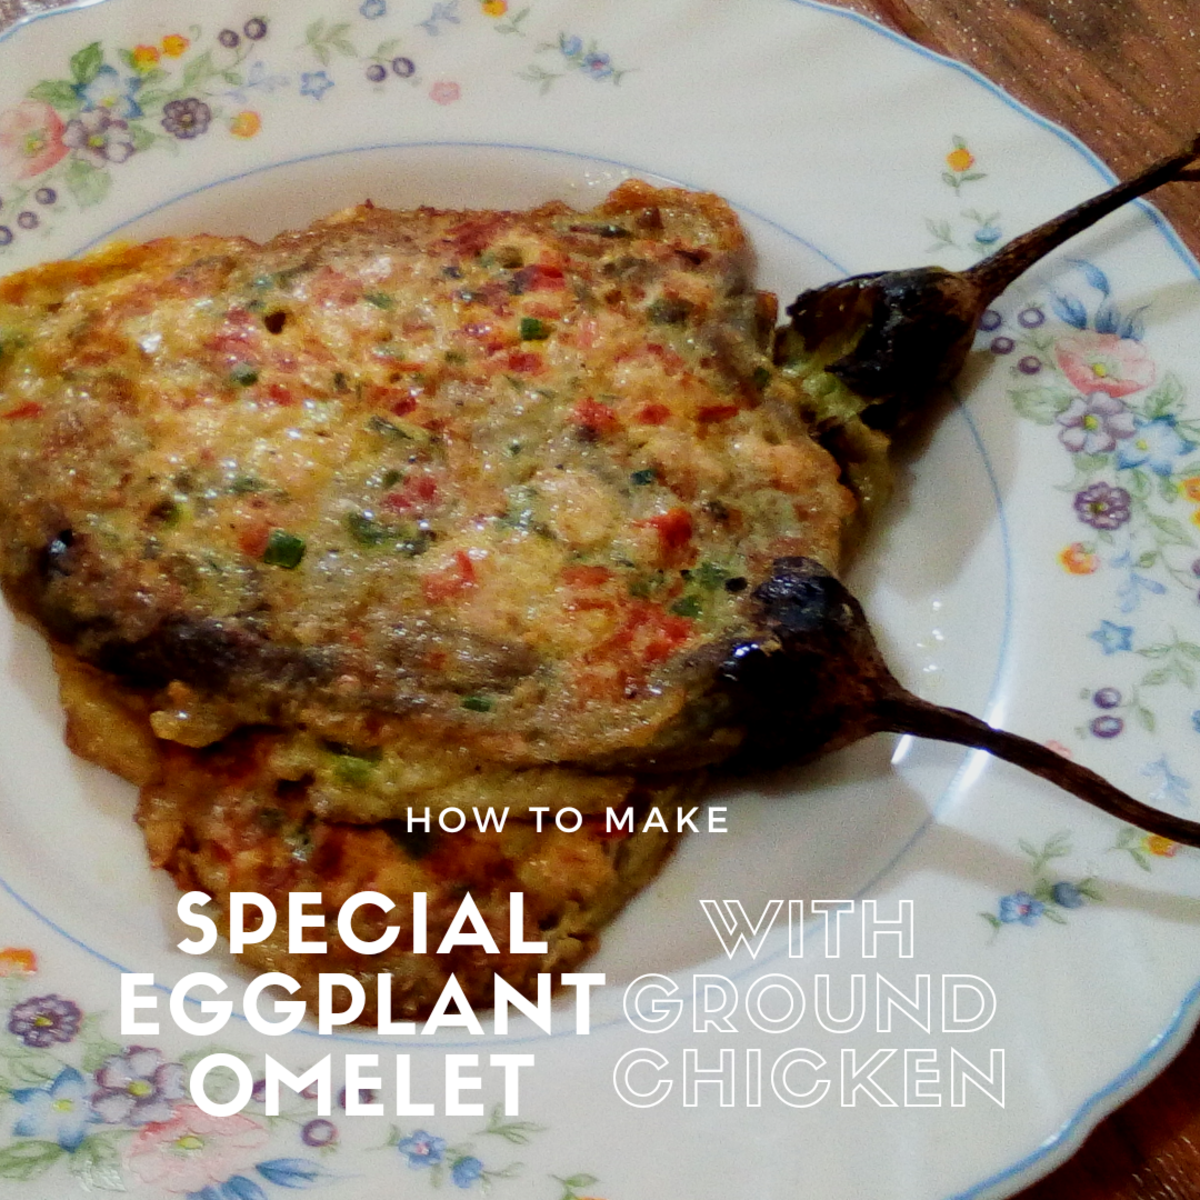 Learn how to make a special eggplant omelet with ground chicken.